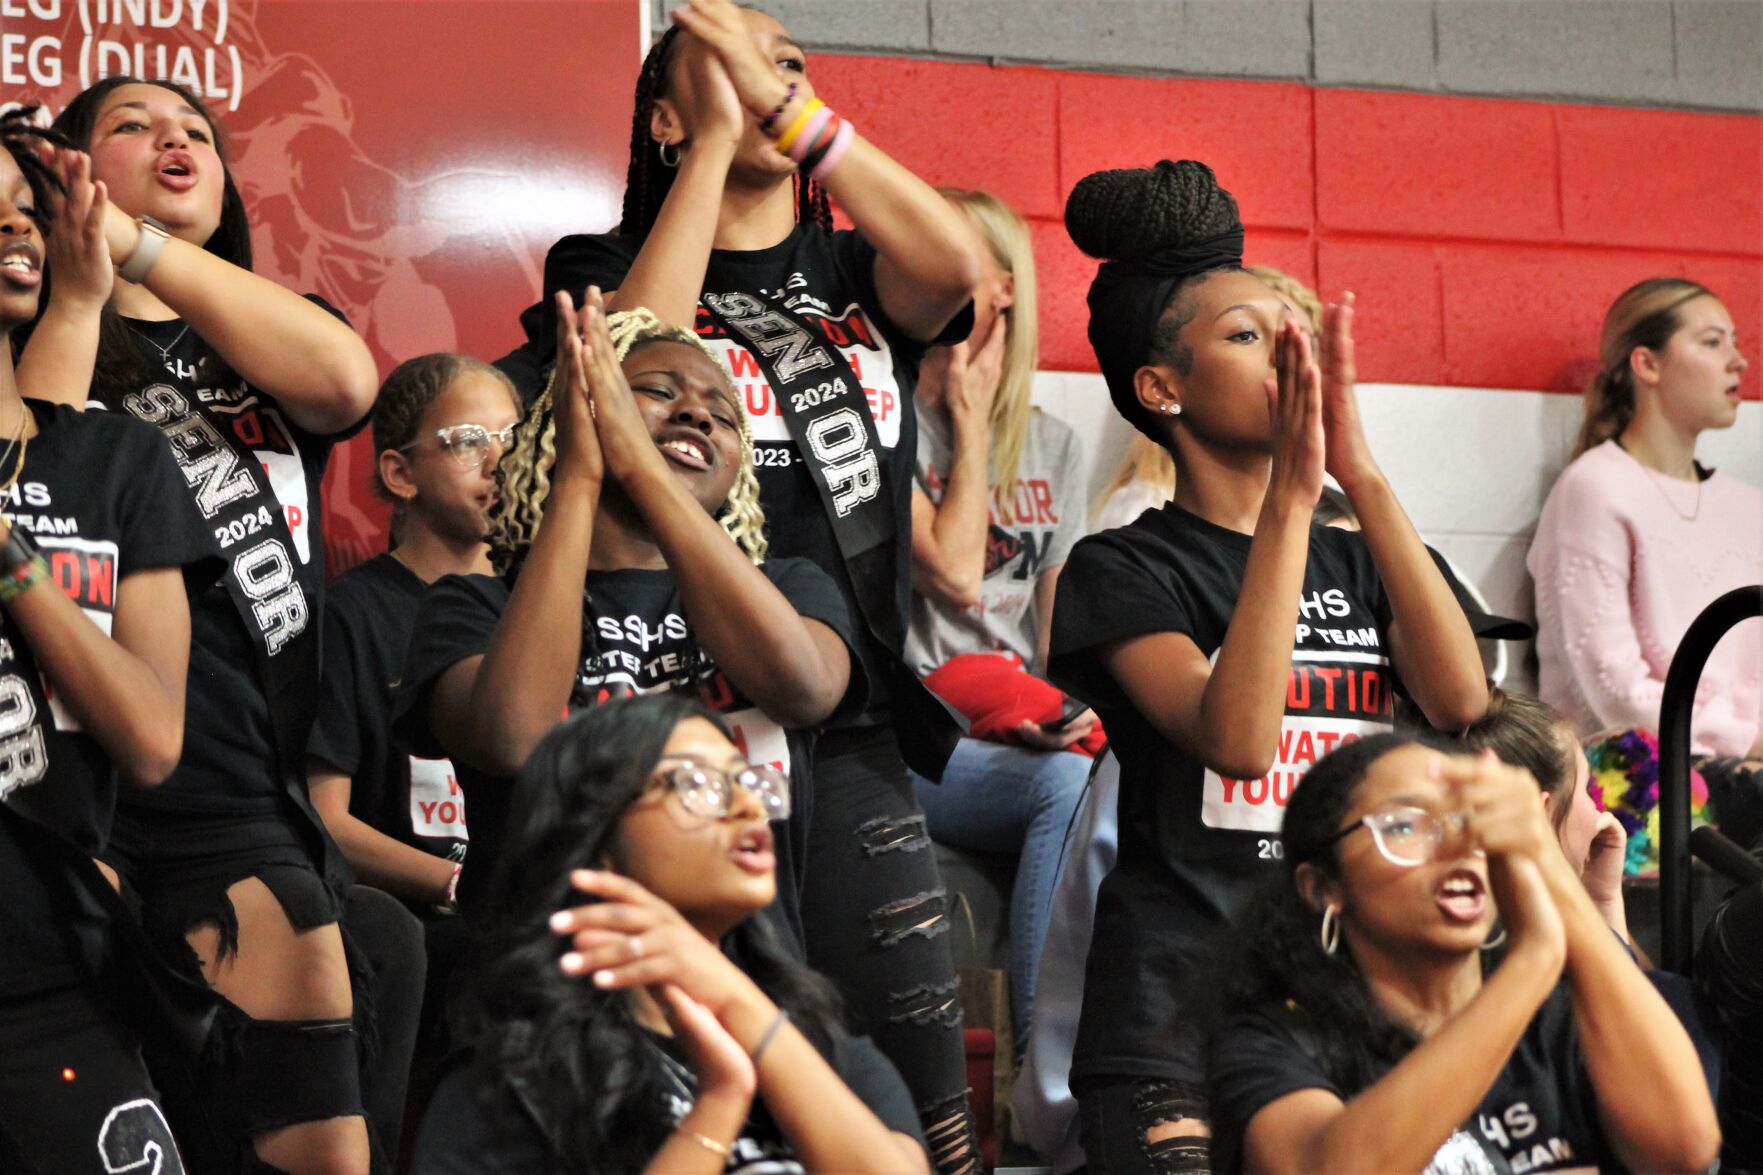 St. Stephens High School Step Team’s Final Halftime Performance: A Decade of Stepping Expressions